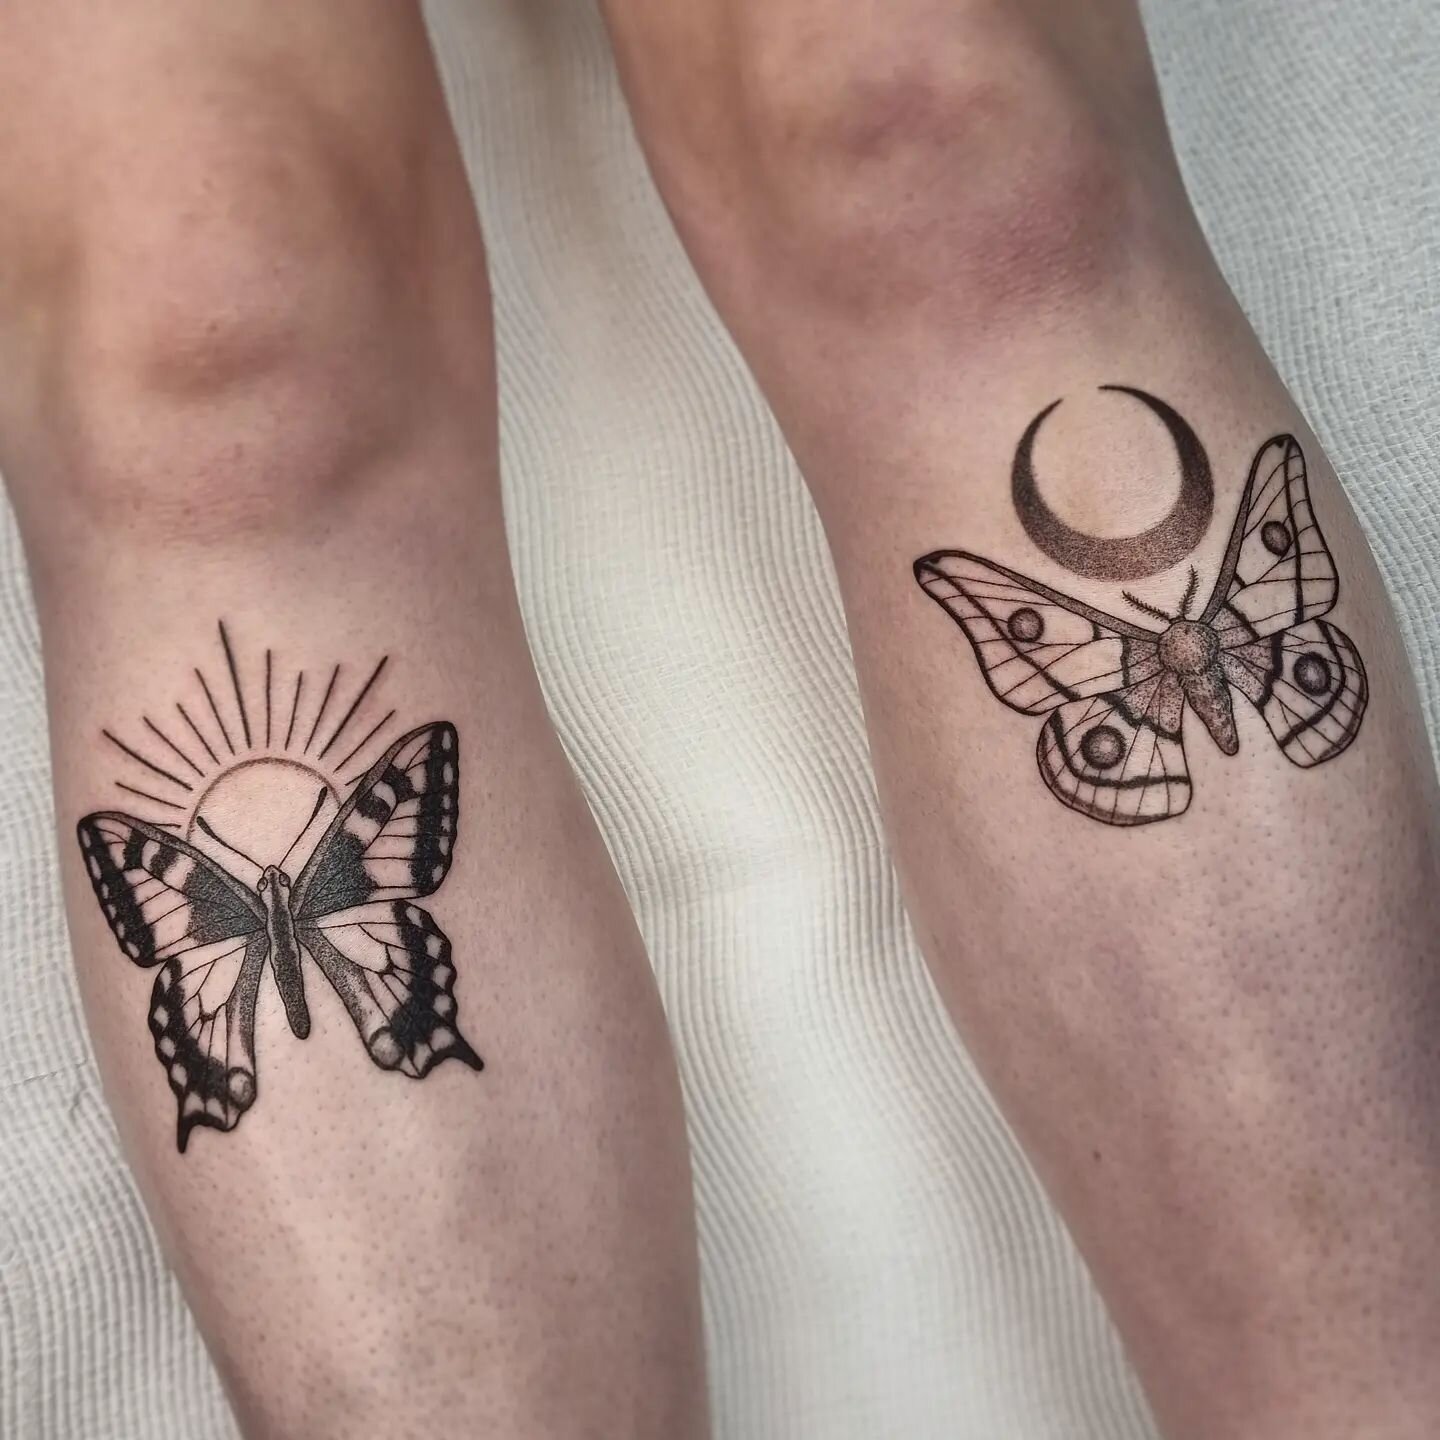 A beautiful moth and butterfly for Amy's shins! Thank you so much for getting these two cuties! 🦋🦋
.
.
.
.
.
#butterflytattoo #mothtattoo #insecttattoo #shintattoo #matchingtattoo #bugtattoo #naturetattoo #naturalhistoryillustration #scientificillu